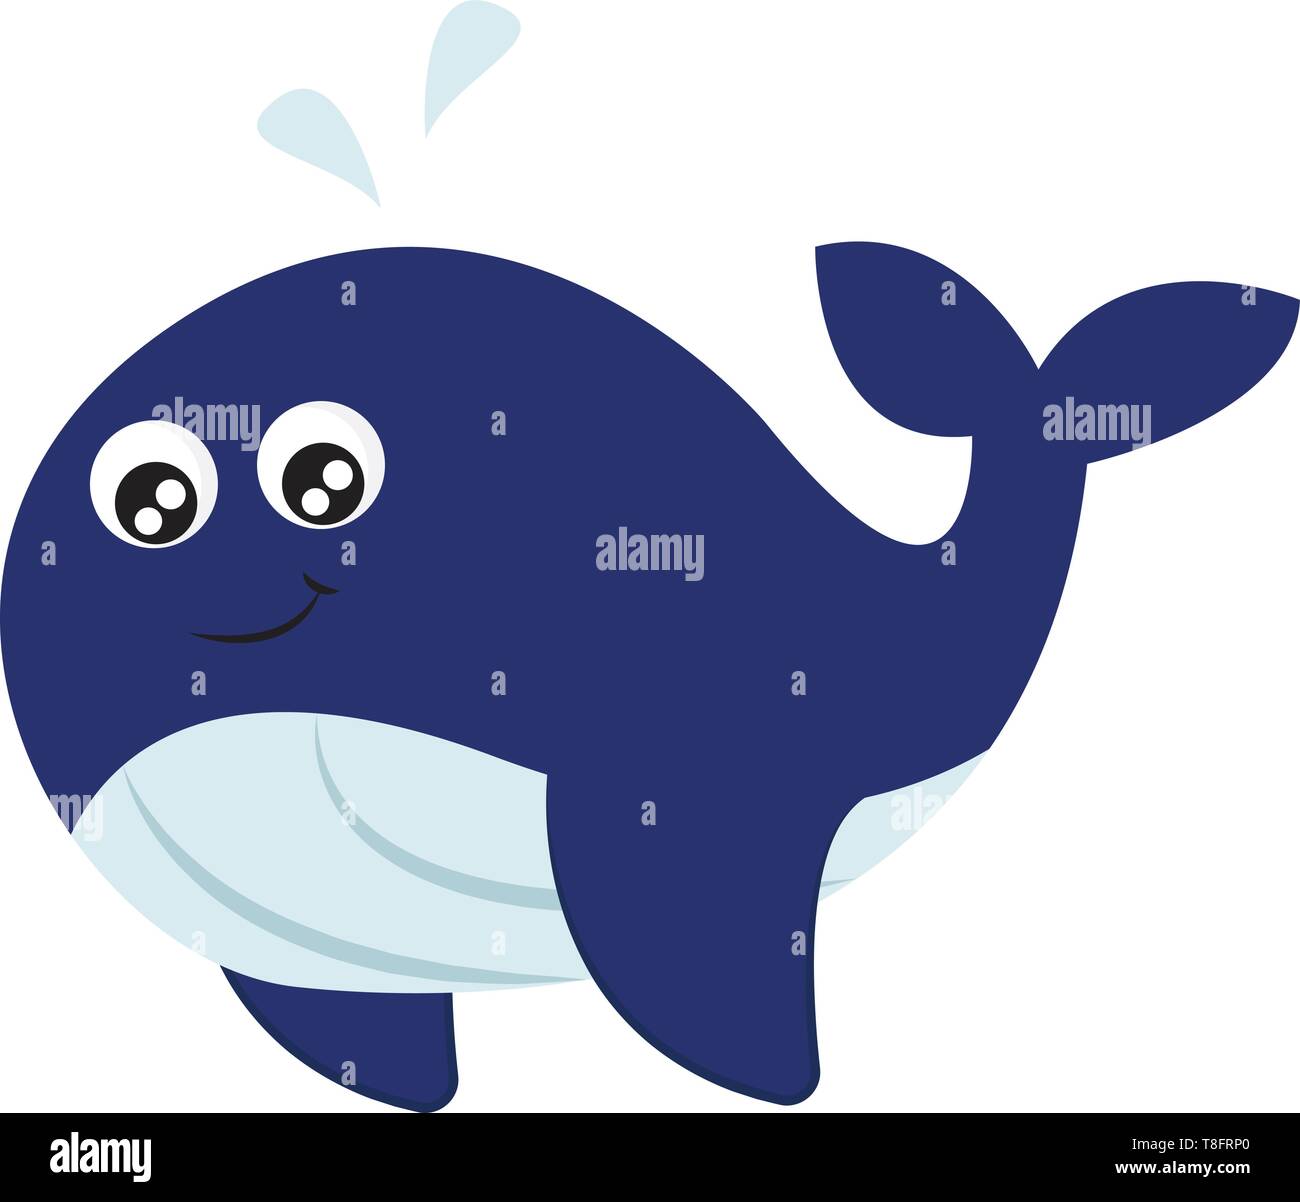 The whale with a streamlined body, forked tail, fins curled down, blue and white, upper and underparts, respectively, smiles and make bubbles while sw Stock Vector